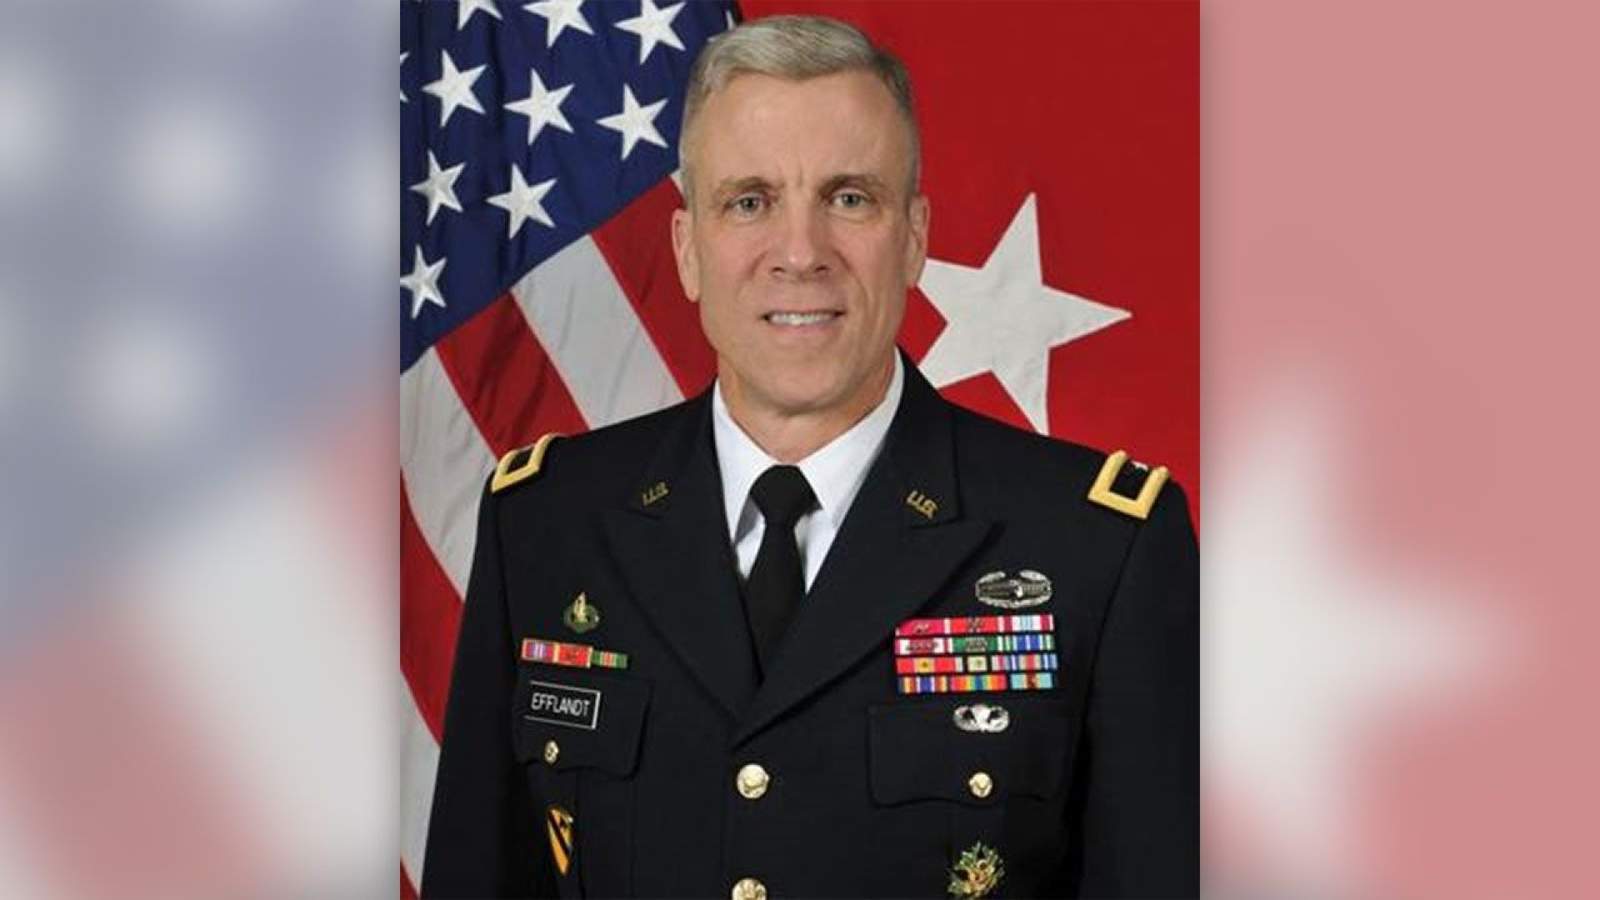 Fort Hood general loses post, denied transfer after incidents at Army base